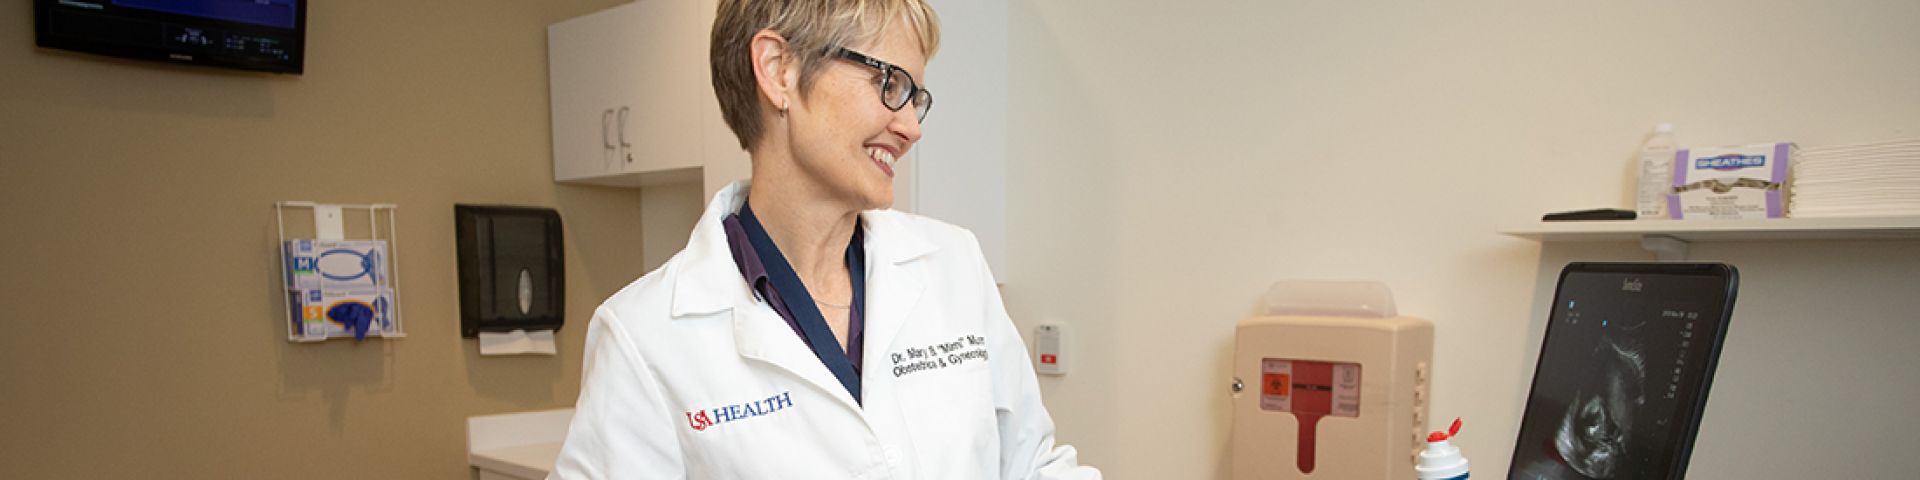 USA Health OB-GYN helps expand care in rural Alabama